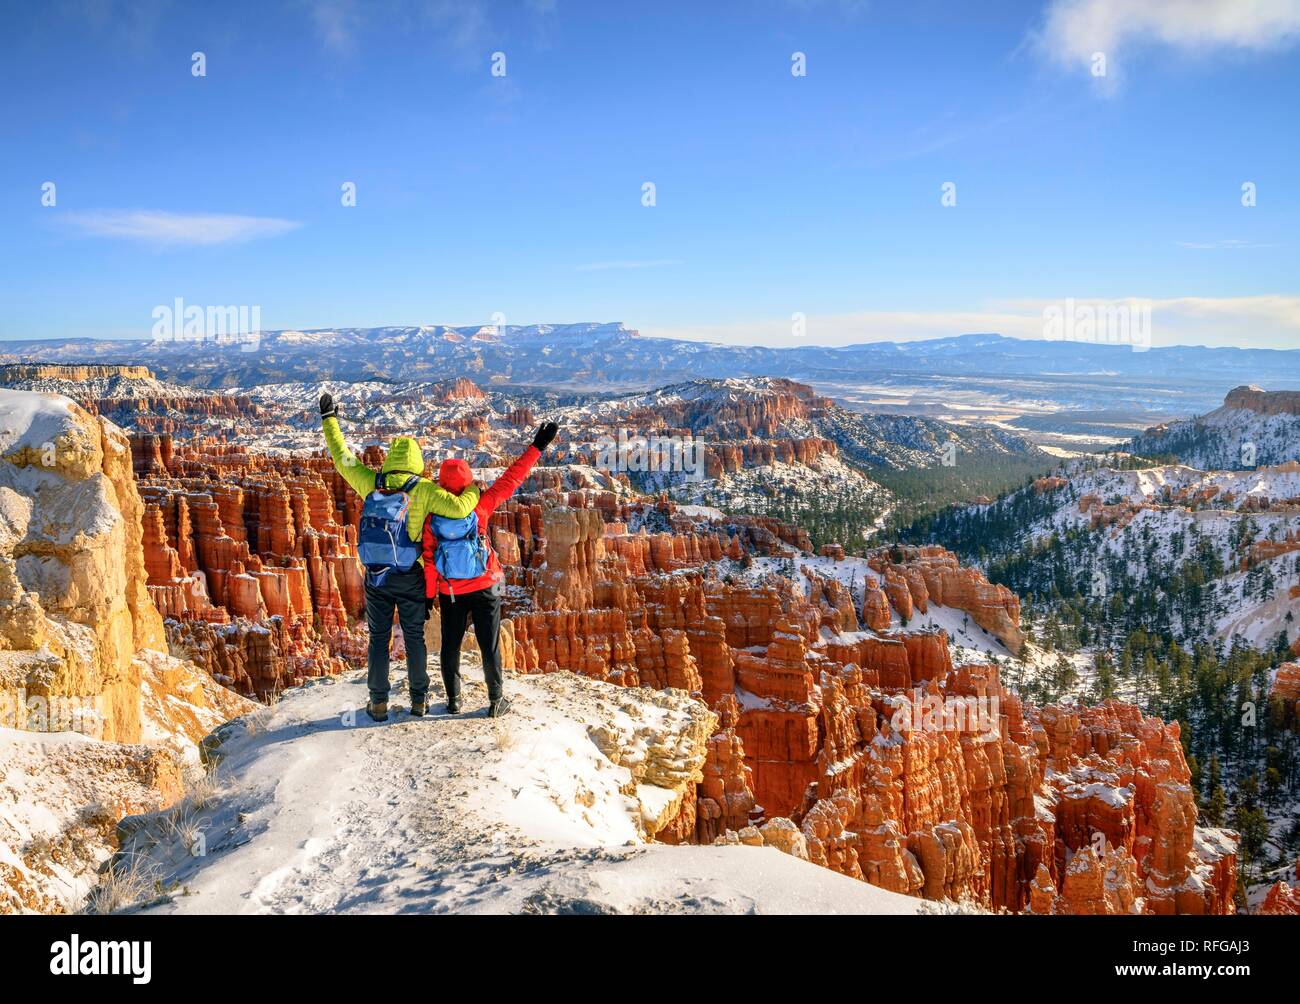 Tourists with outstretched arms overlooking the amphitheatre, bizarre snow-covered rocky landscape with Hoodoos in winter Stock Photo